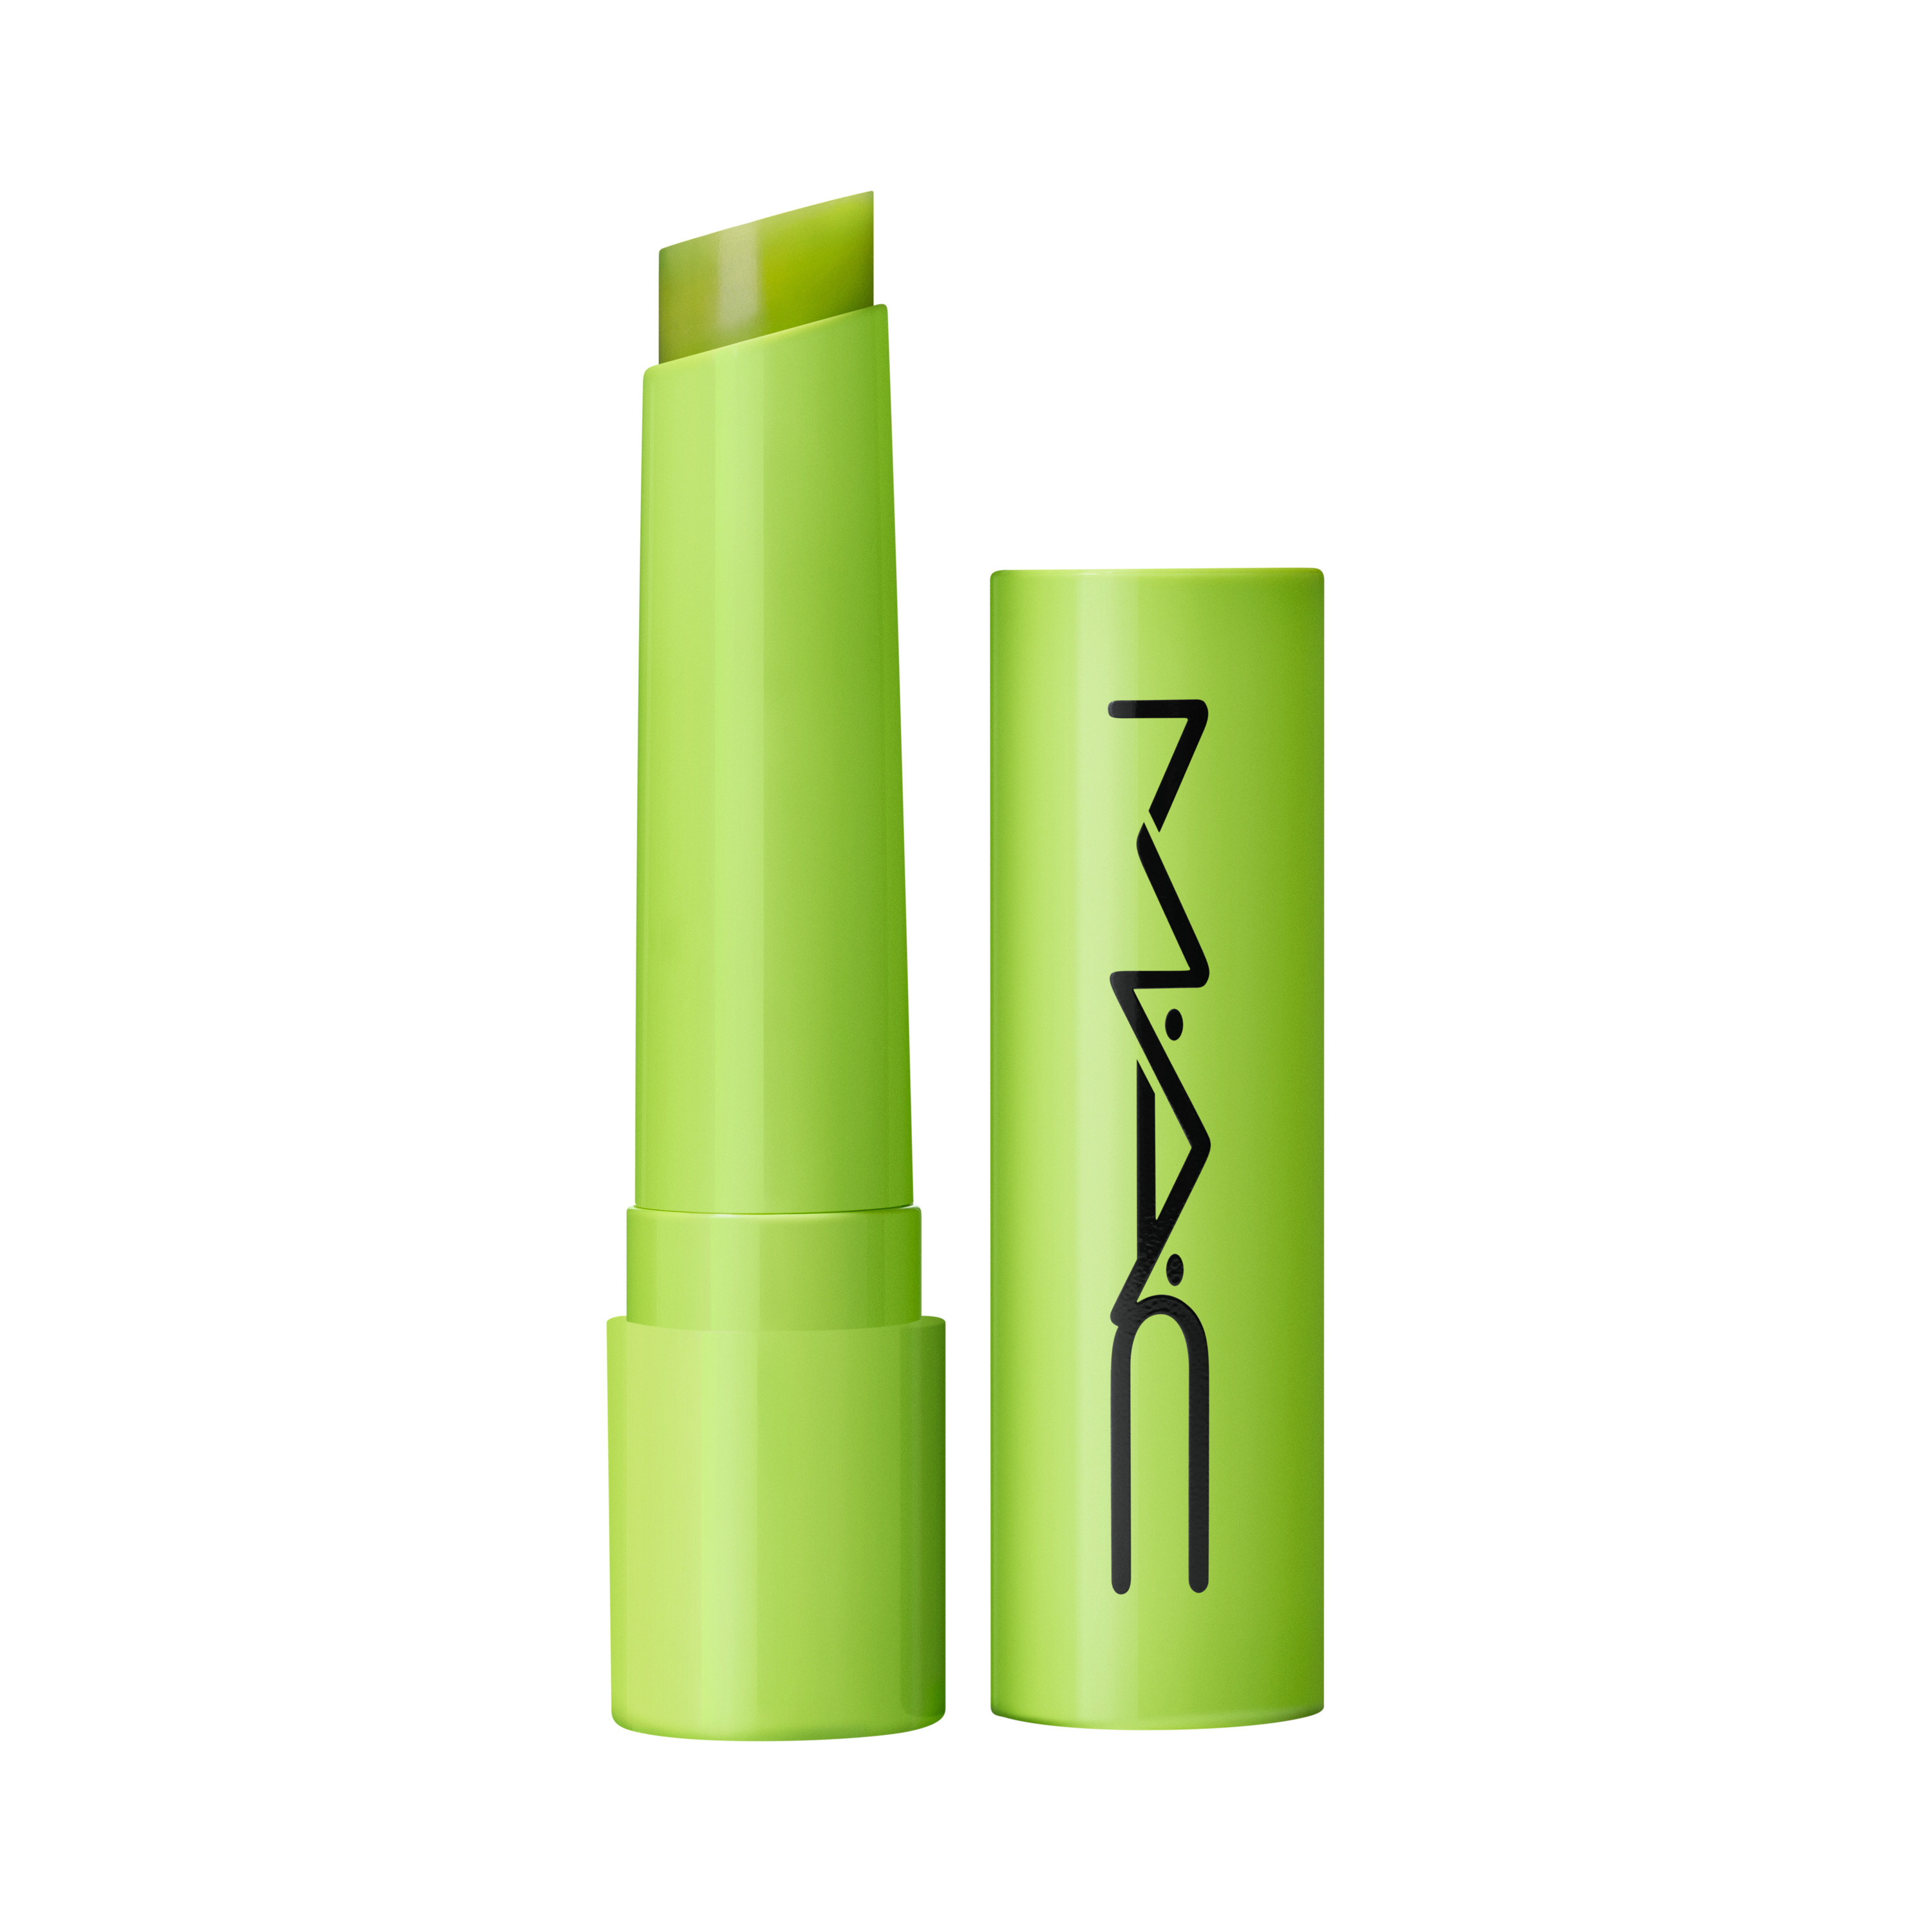 Squirt plumping gloss stick - Like Squirt, Green, large image number 0